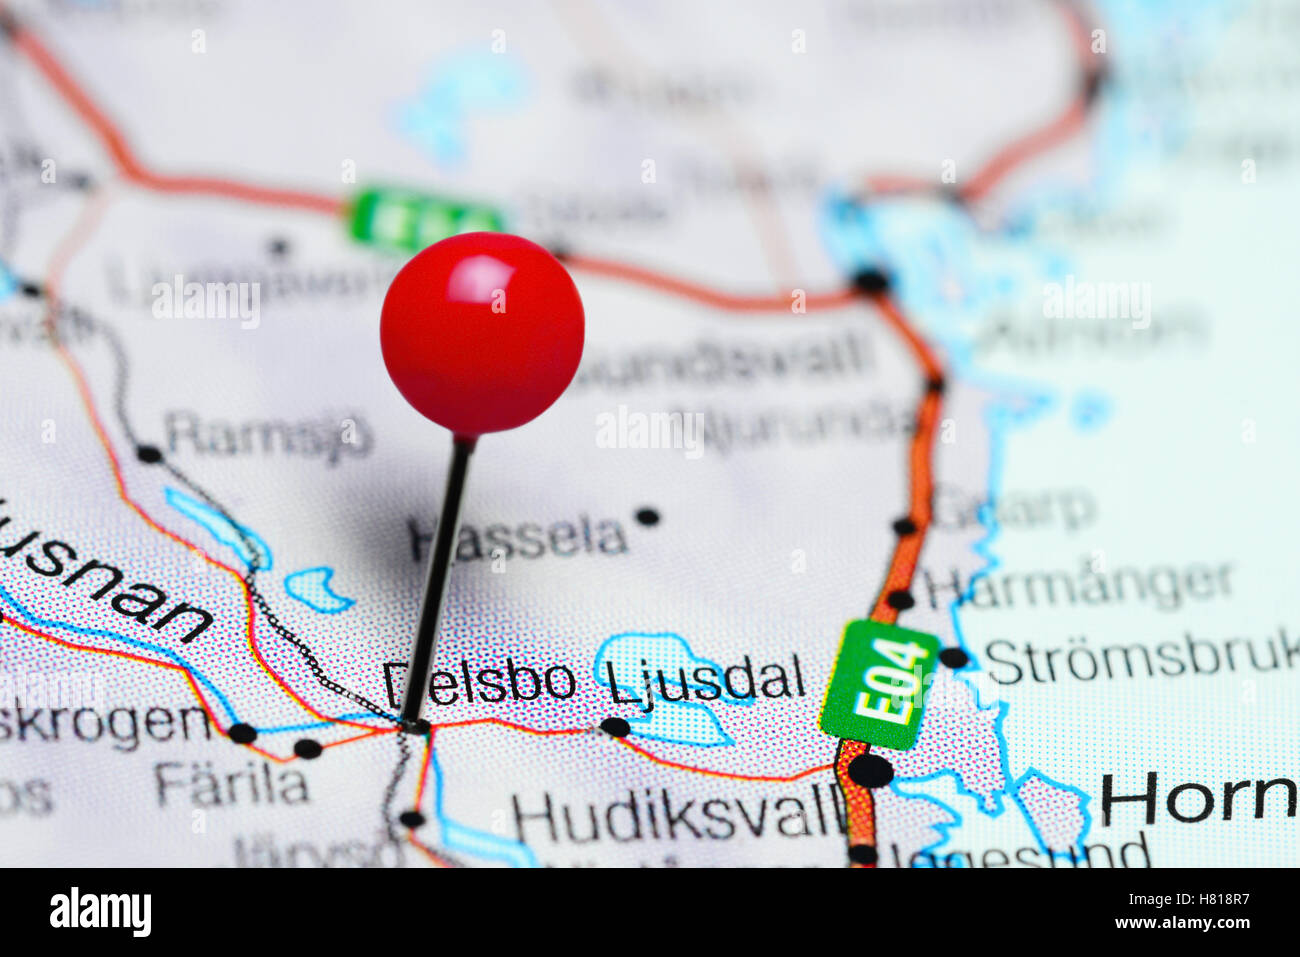 Delsbo pinned on a map of Sweden Stock Photo